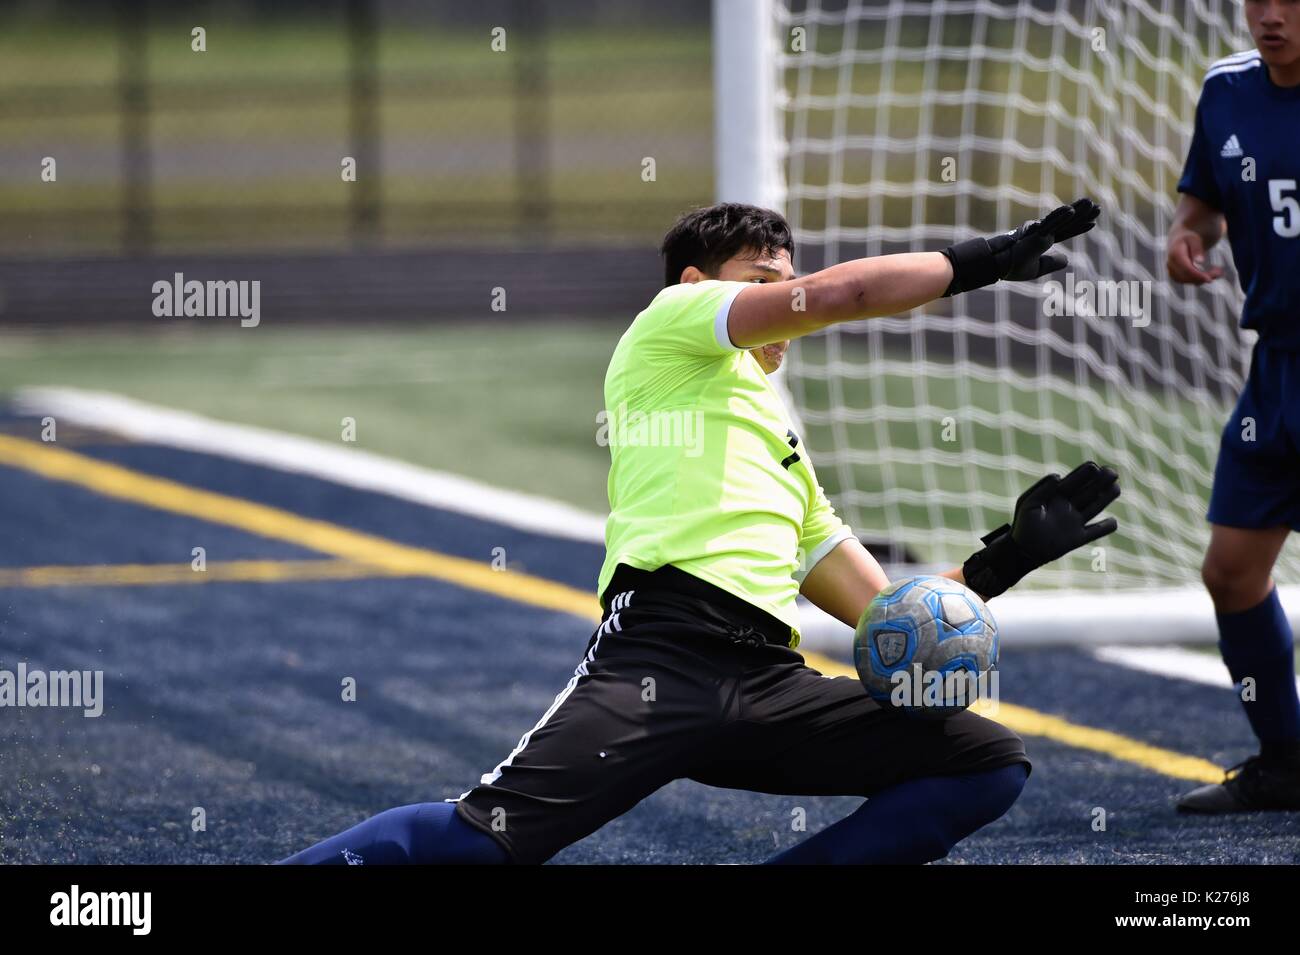 Keeper ranging out from his goal to make a stop on a centering pass destined for in front of his net. USA. Stock Photo